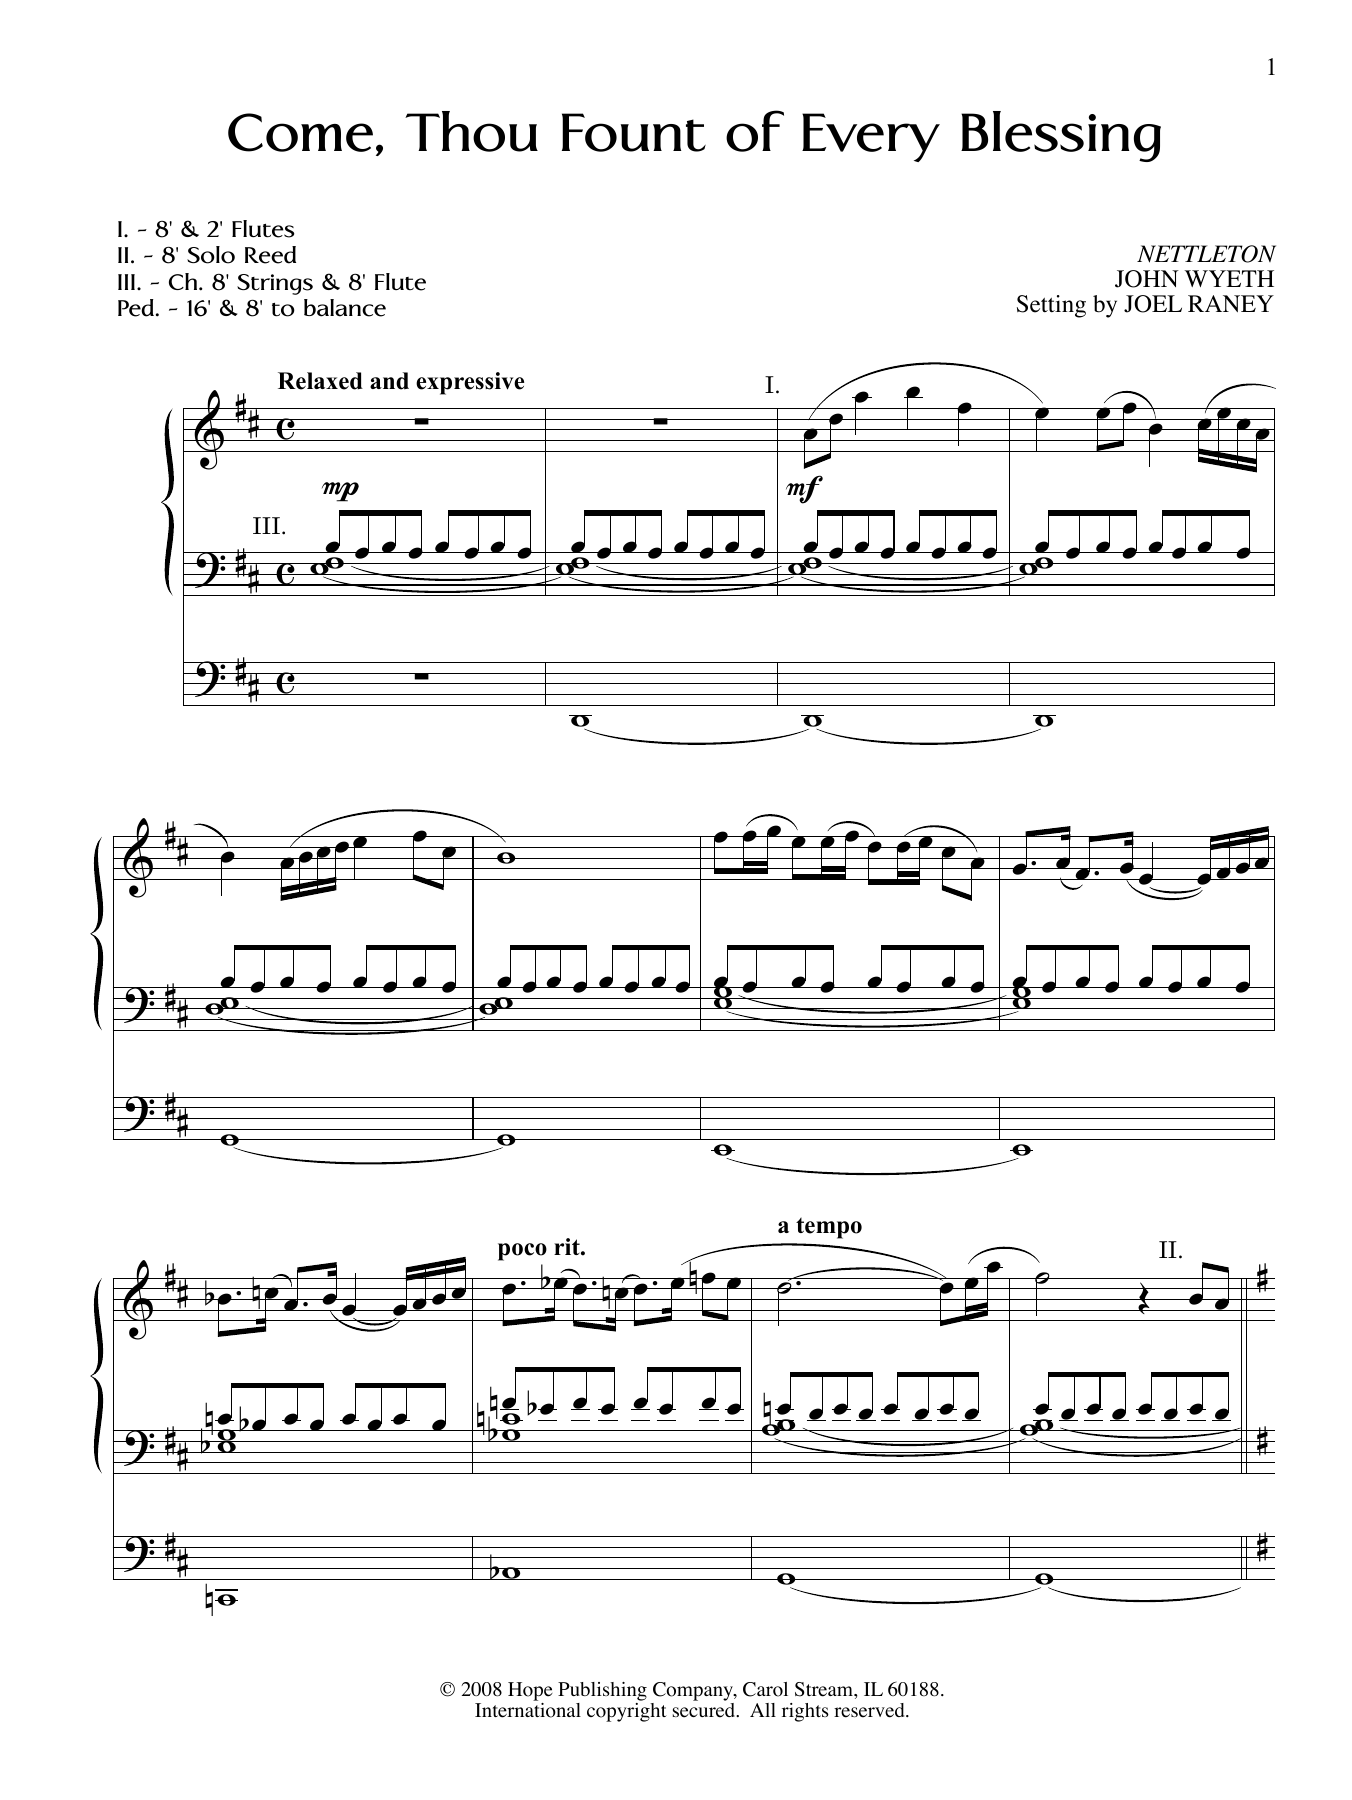 Download Joel Raney Come, Thou Fount Of Every Blessing Sheet Music